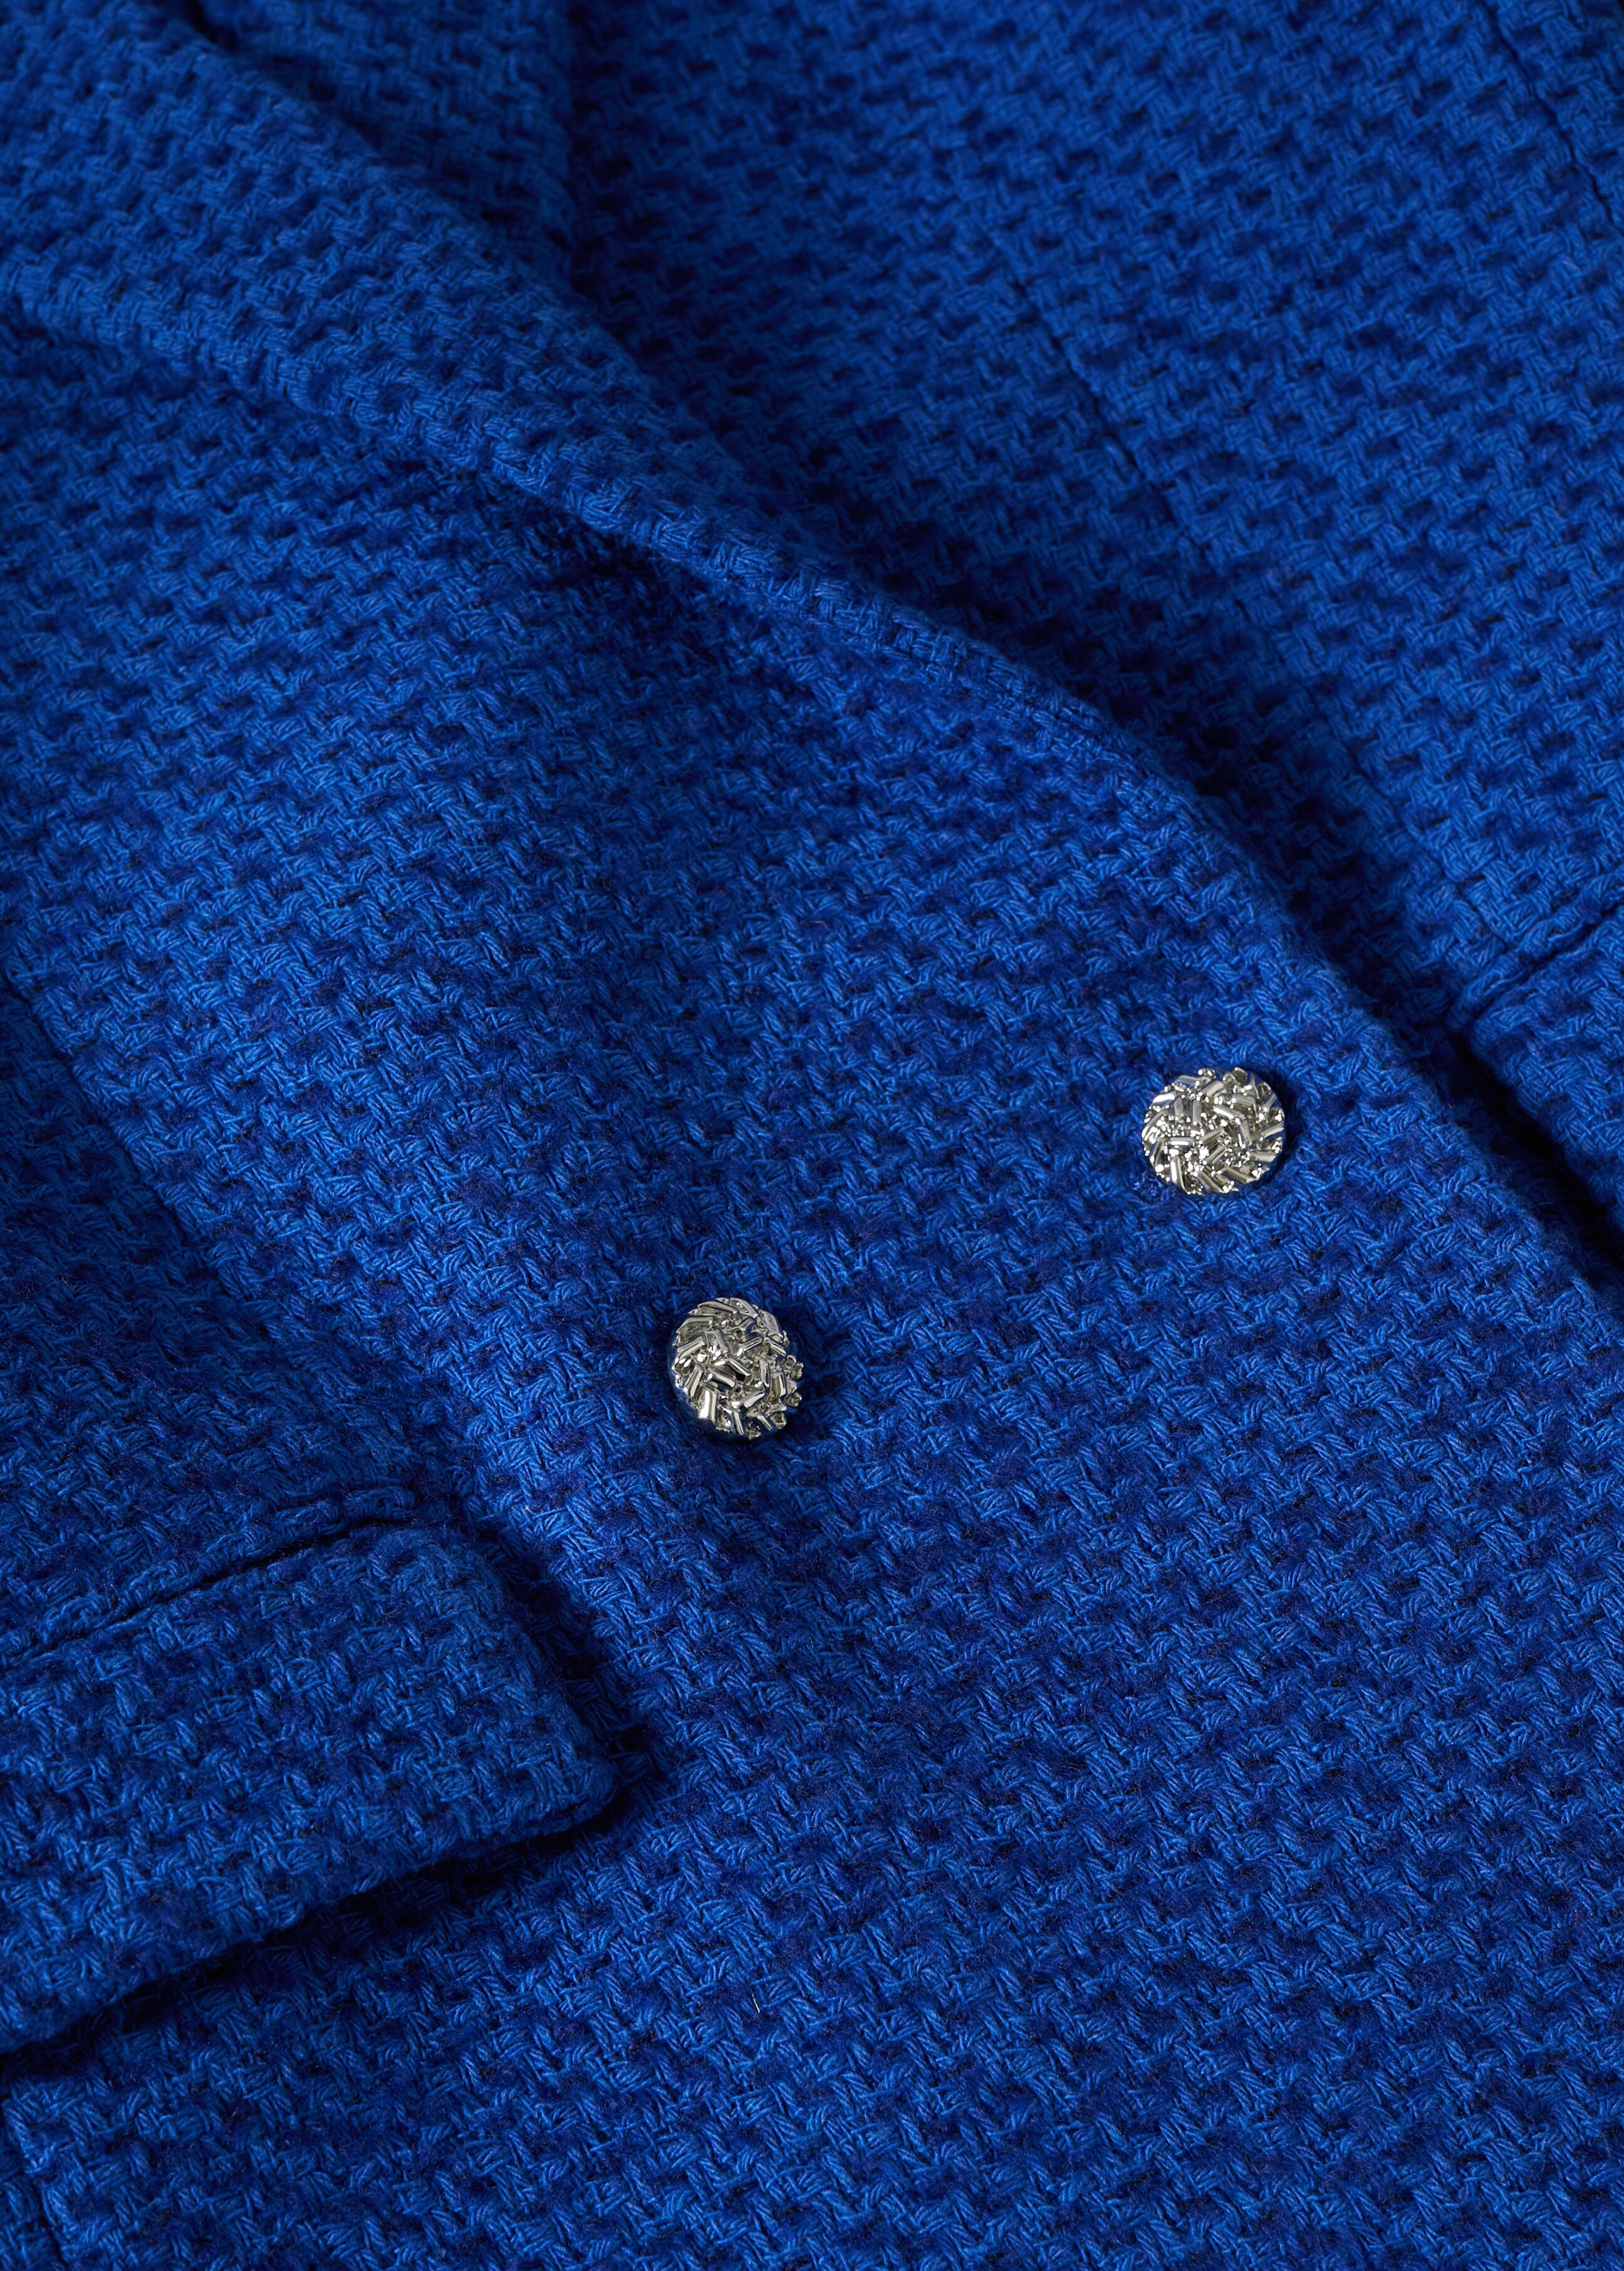 Tweed jacket with jewel buttons - Details of the article 8